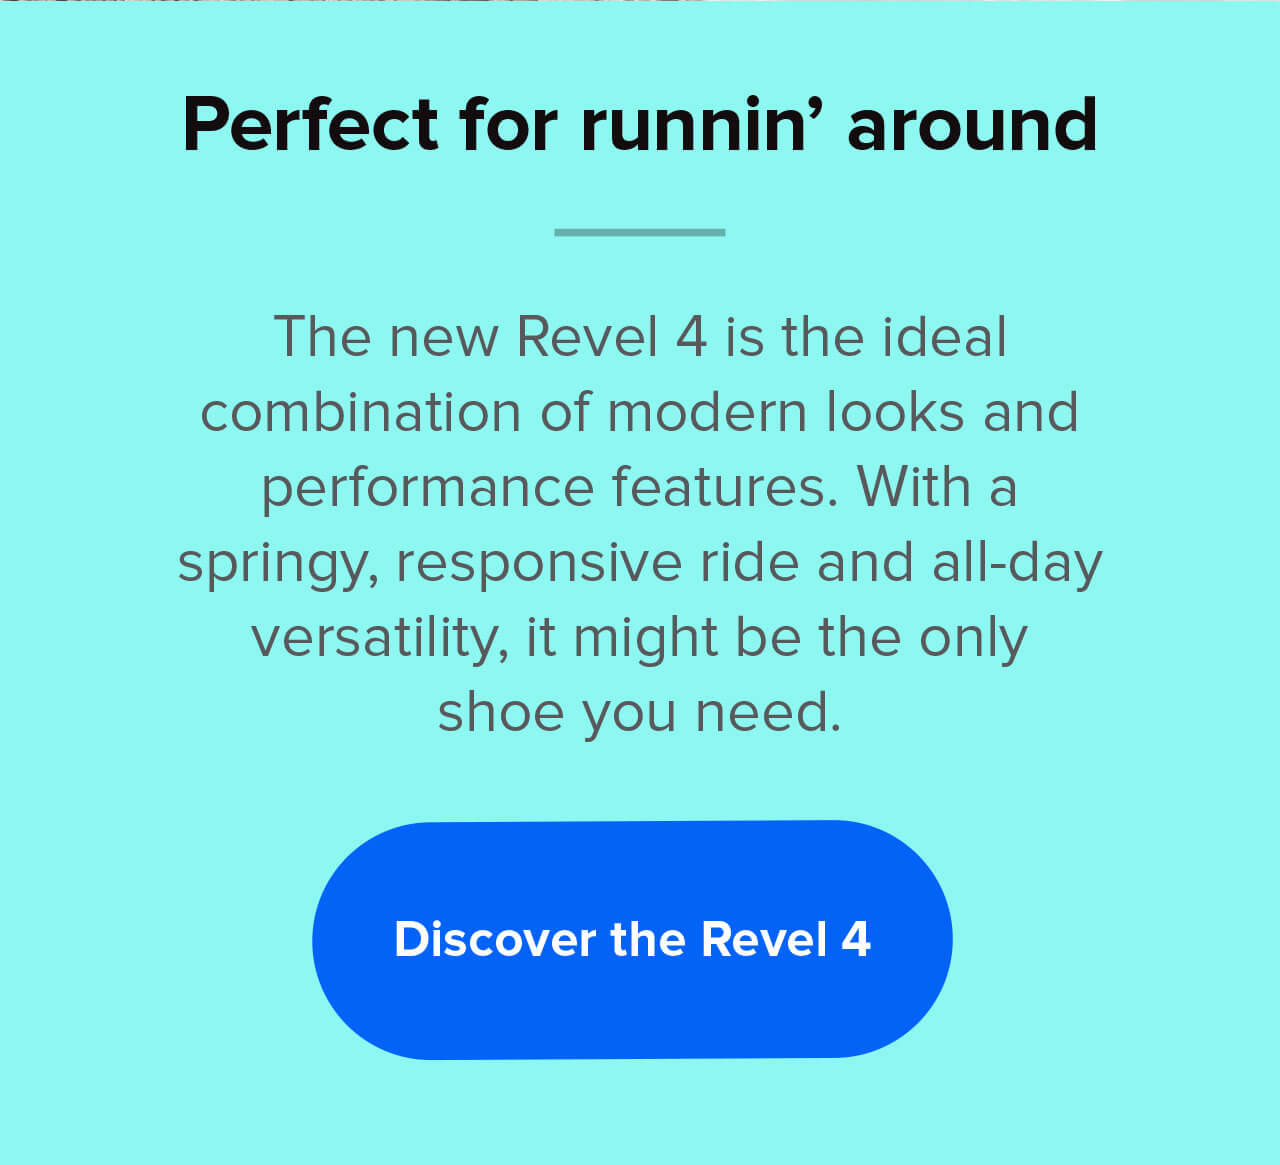 Perfect for runnin’ around | The new Revel 4 is the ideal combination of modern looks and performance features. With a springy, responsive ride and all-day versatility, it might be the only shoe you need. | Discover the Revel 4